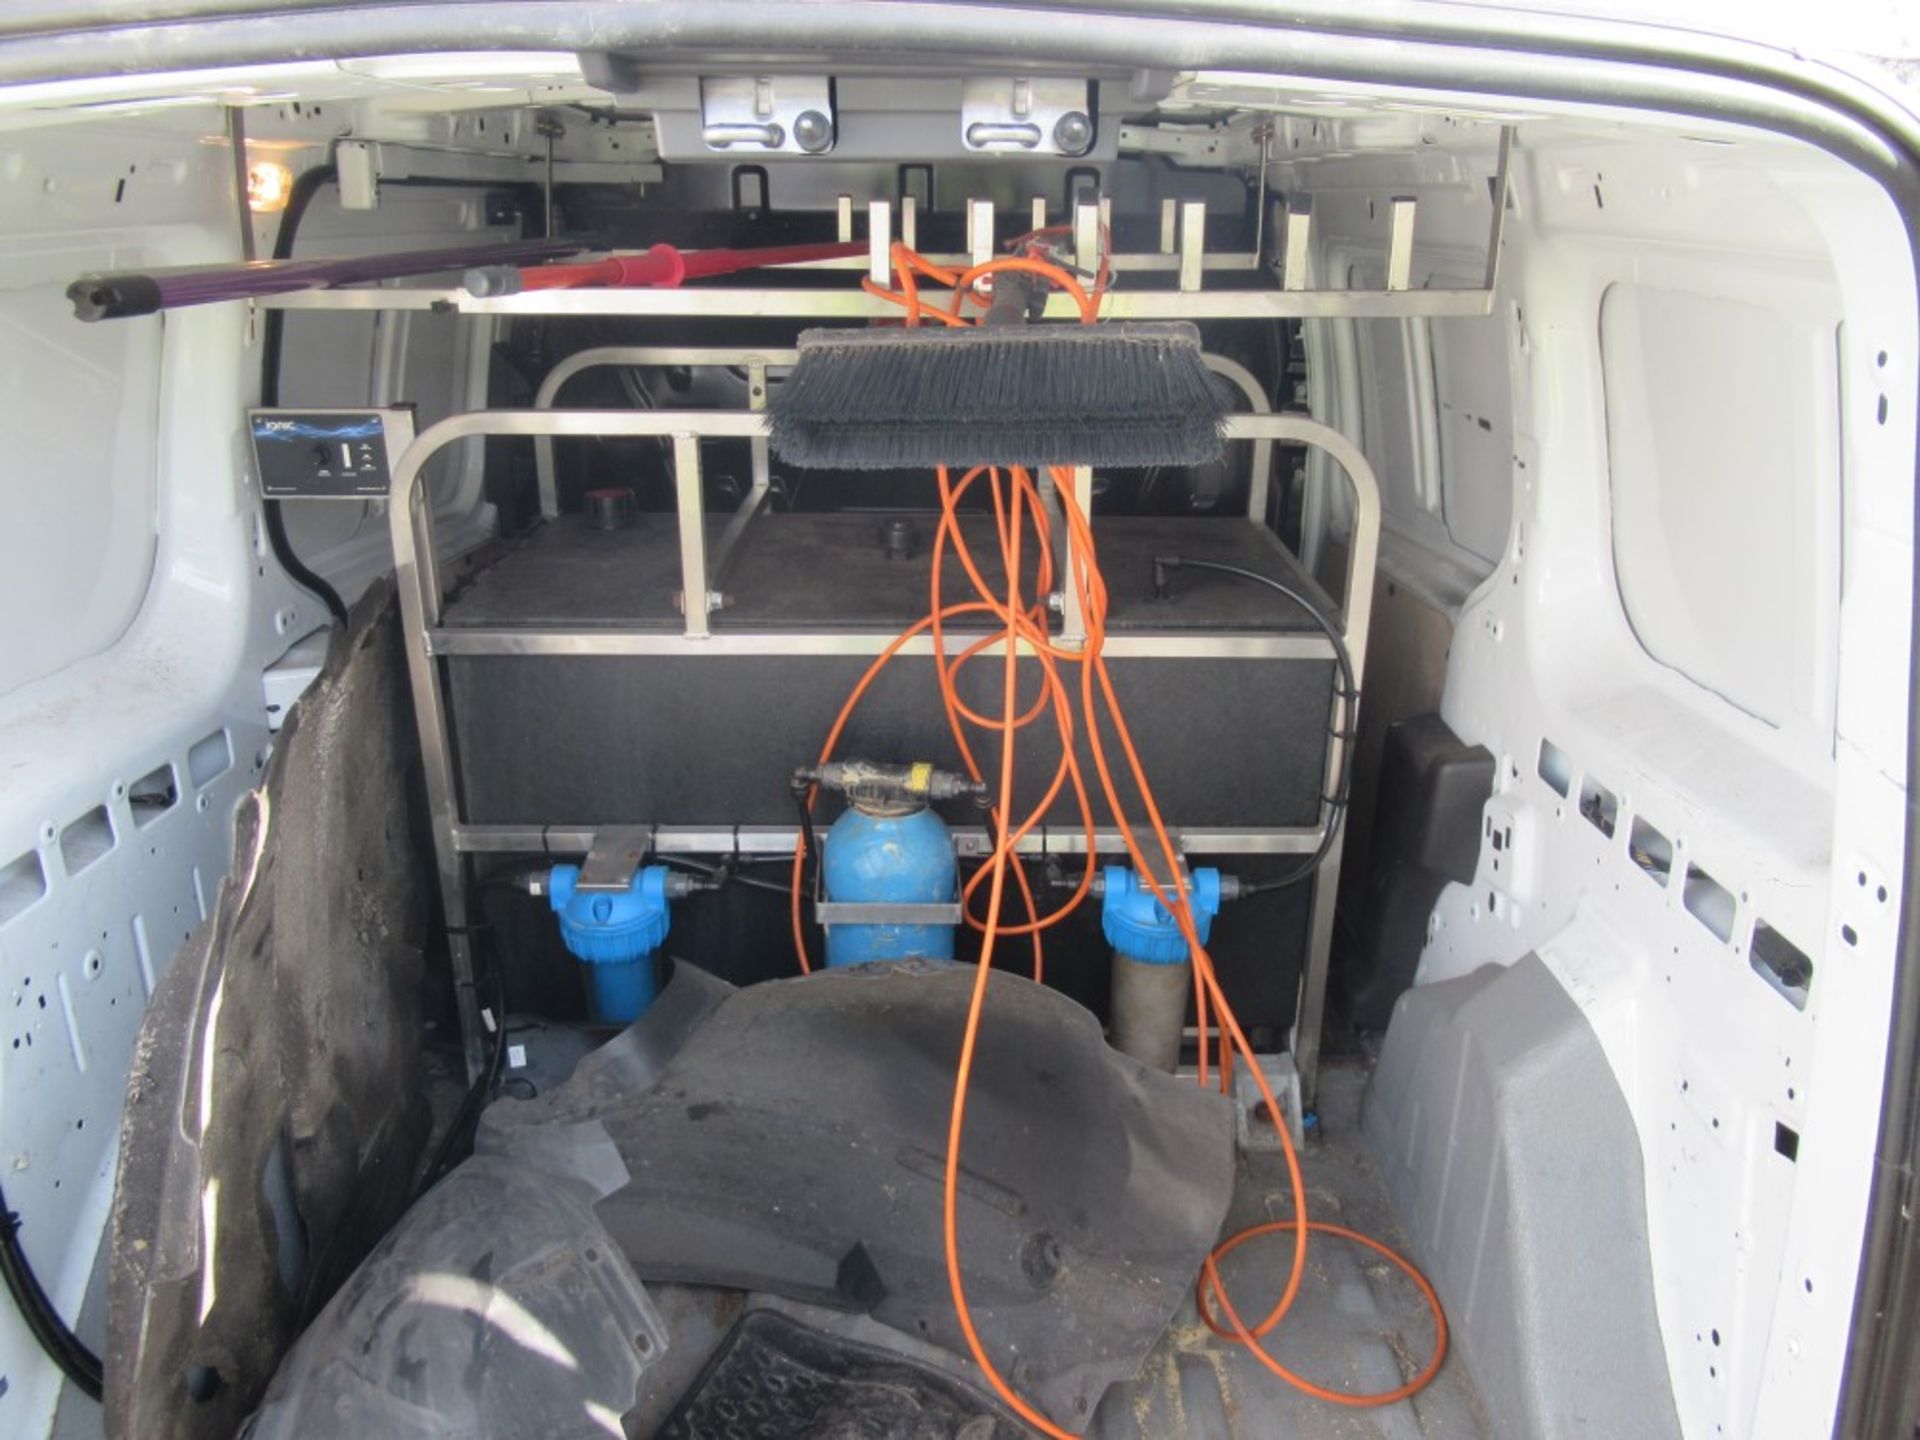 64 reg FORD TRANSIT CONNECT 210 ECO-TECH C/W REACH & WASH SYSTEM IN REAR, 1ST REG 09/14, 120053M - Image 5 of 7